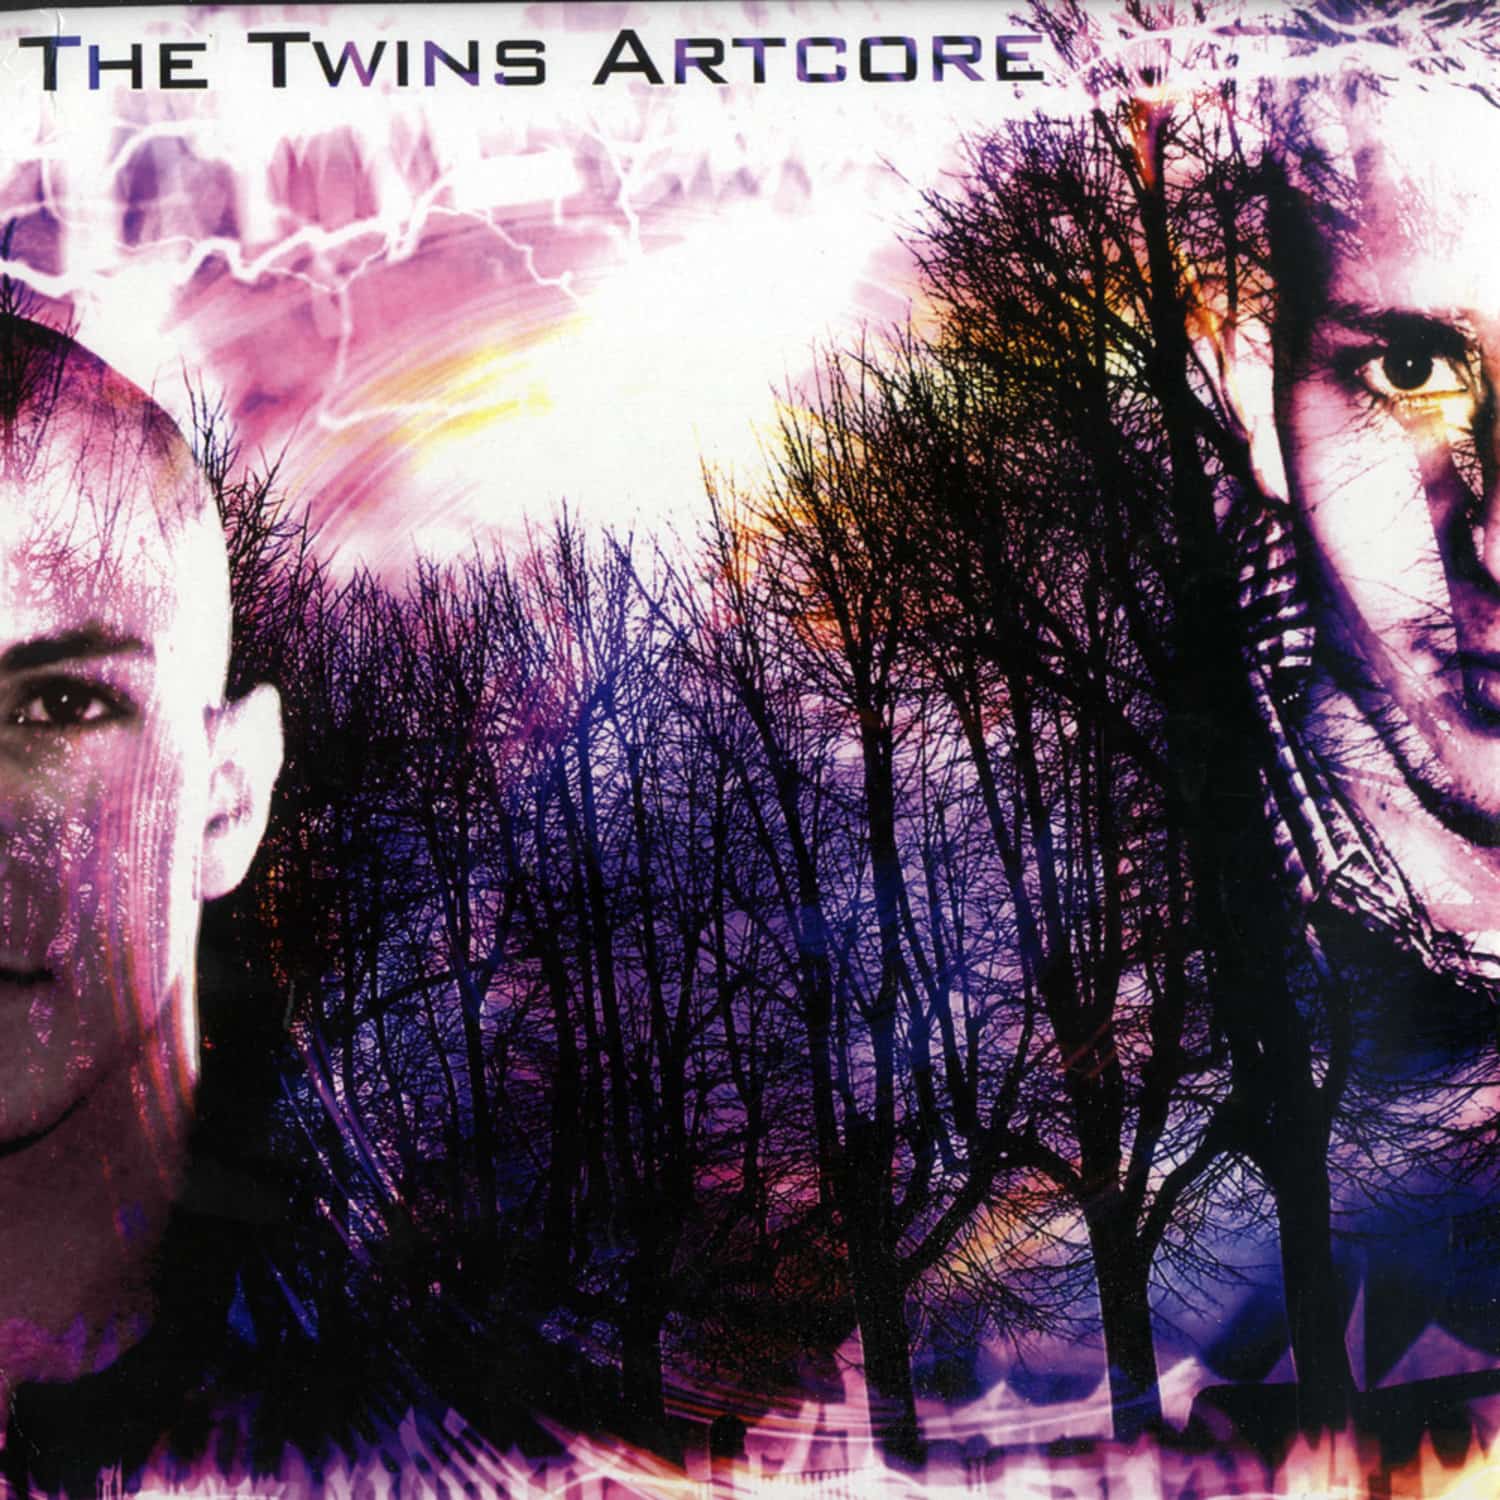 The Twins Artcore - THE NEVER ENDING STORY 2